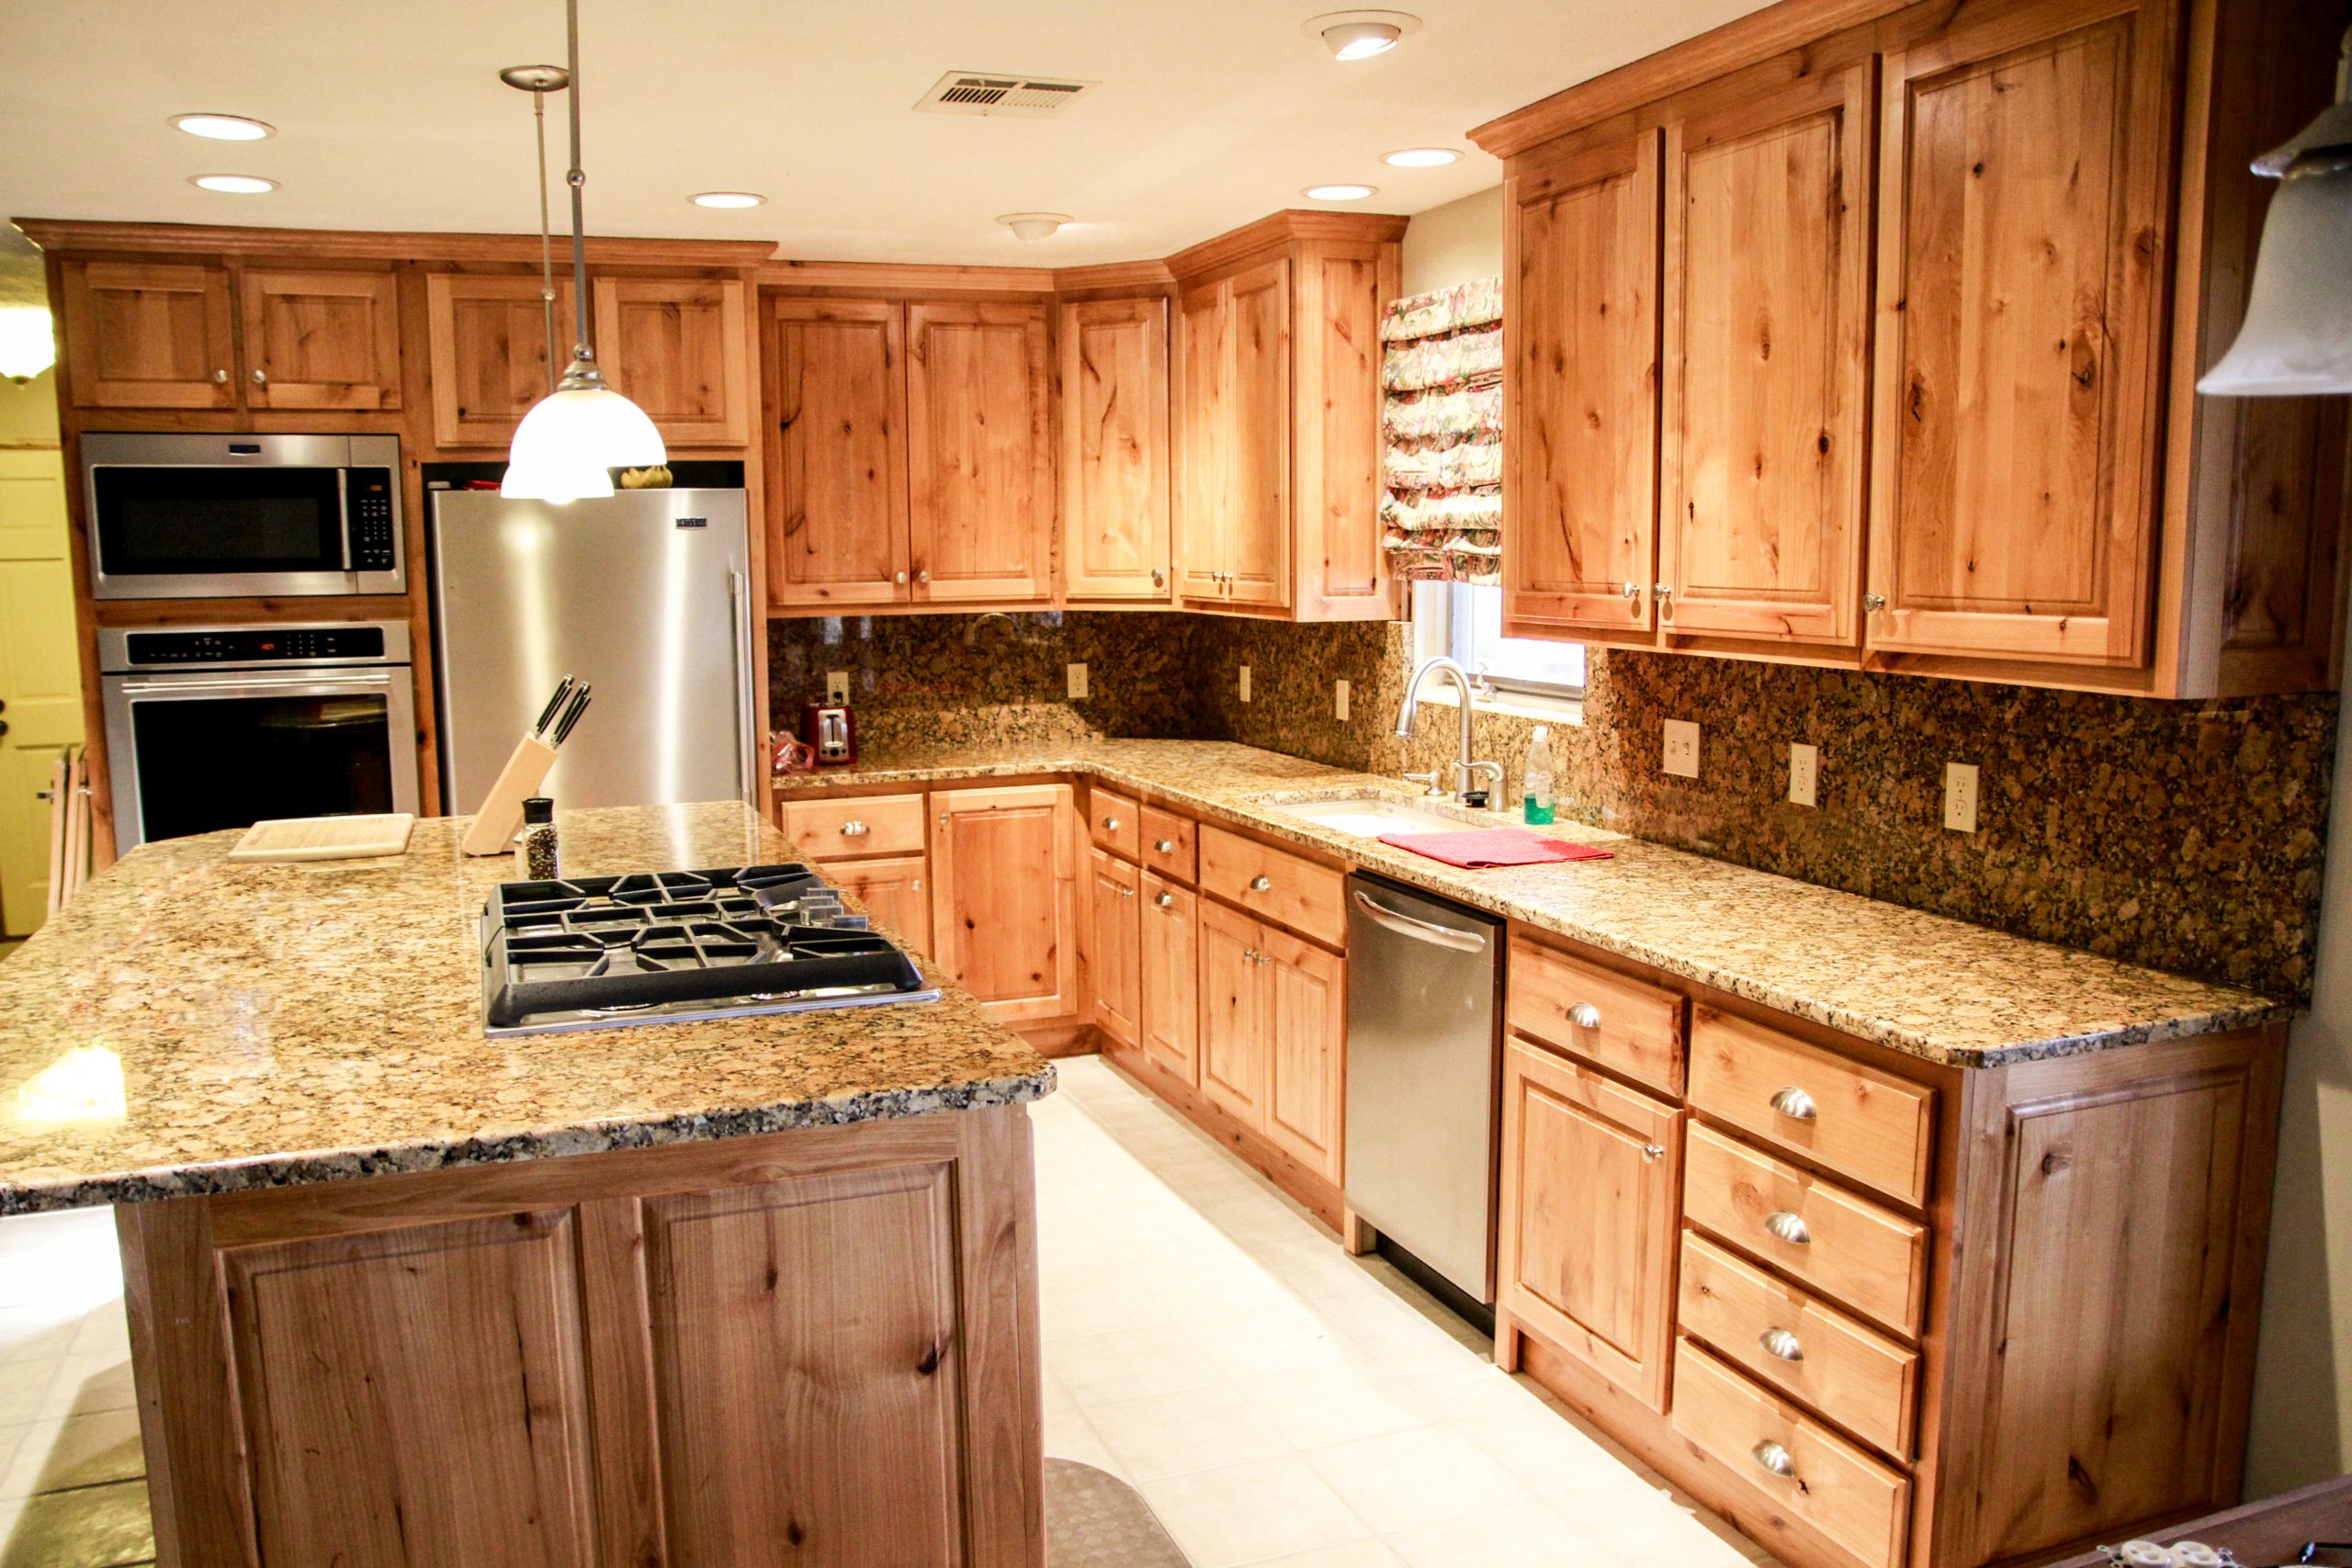 Farmhouse Kitchen Cabinets in Millstone Township NJ, Buy custom kitchen cabinets factory direct in Millstone Township NJ, Buy custom shaker cabinets factory direct in Millstone Township NJ